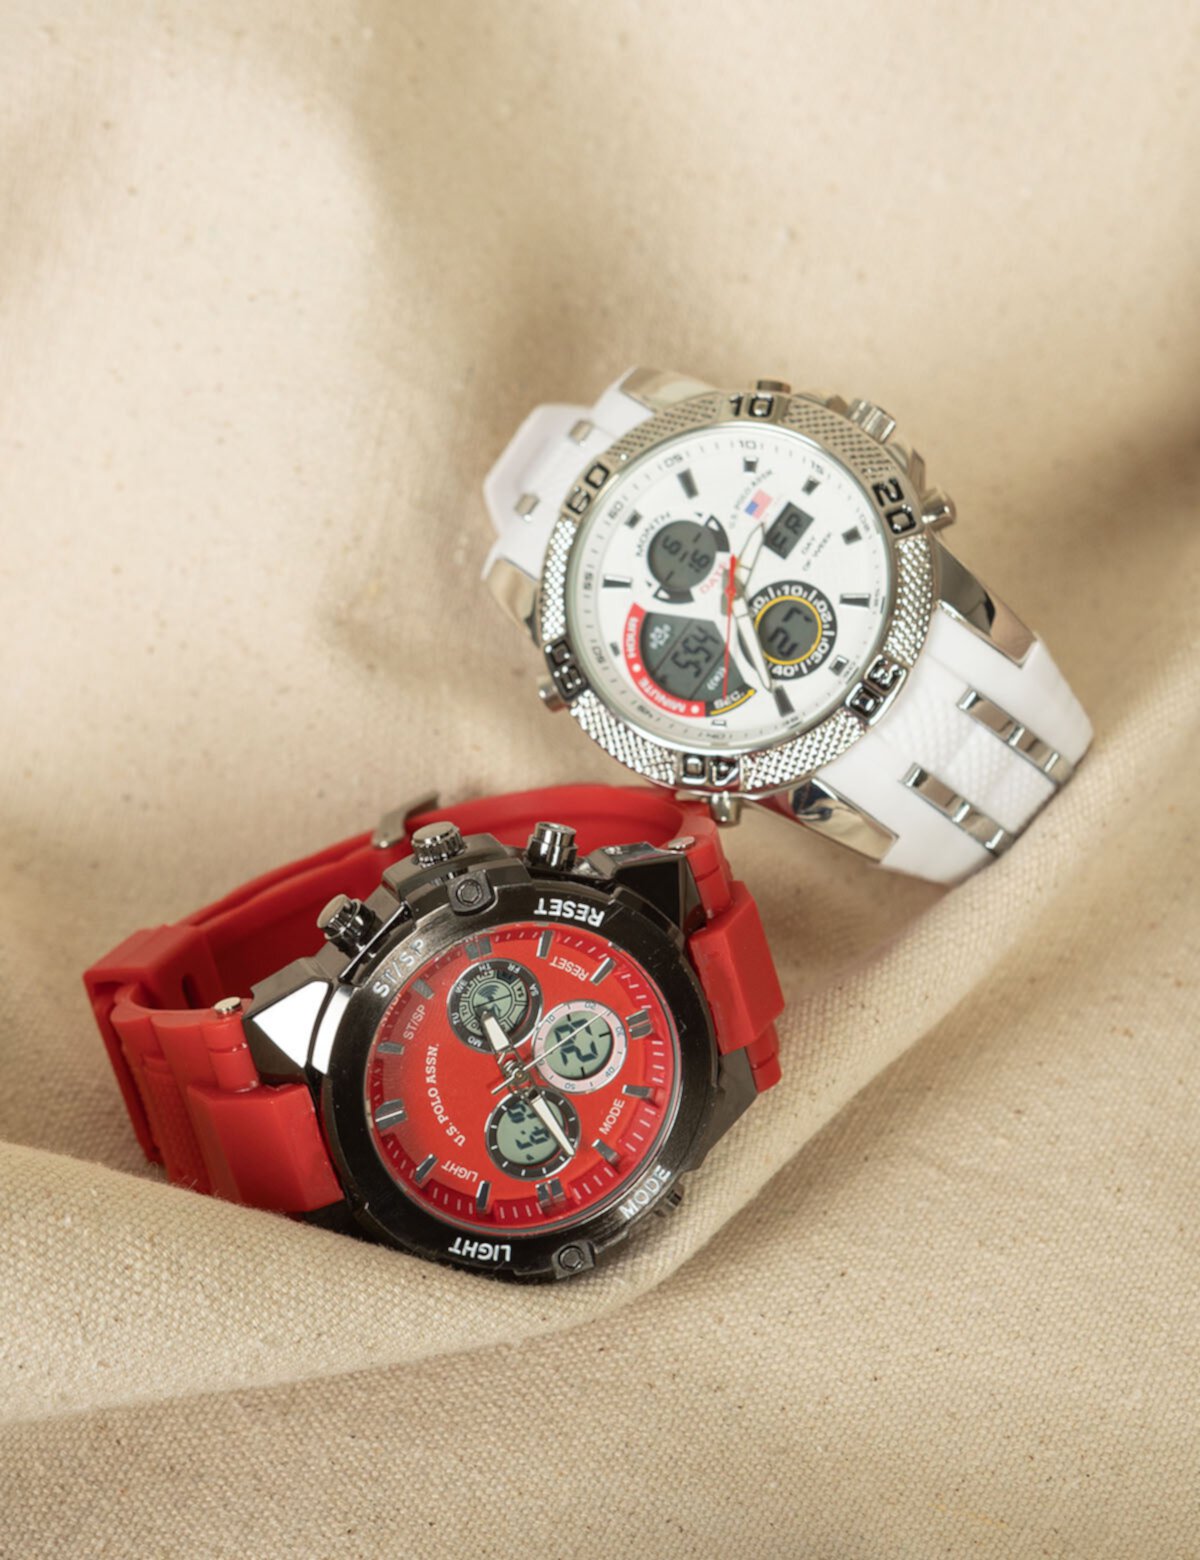 MEN'S RED AND BLACK RUBBER STRAP ANA DIGI WATCH U.S. POLO ASSN.